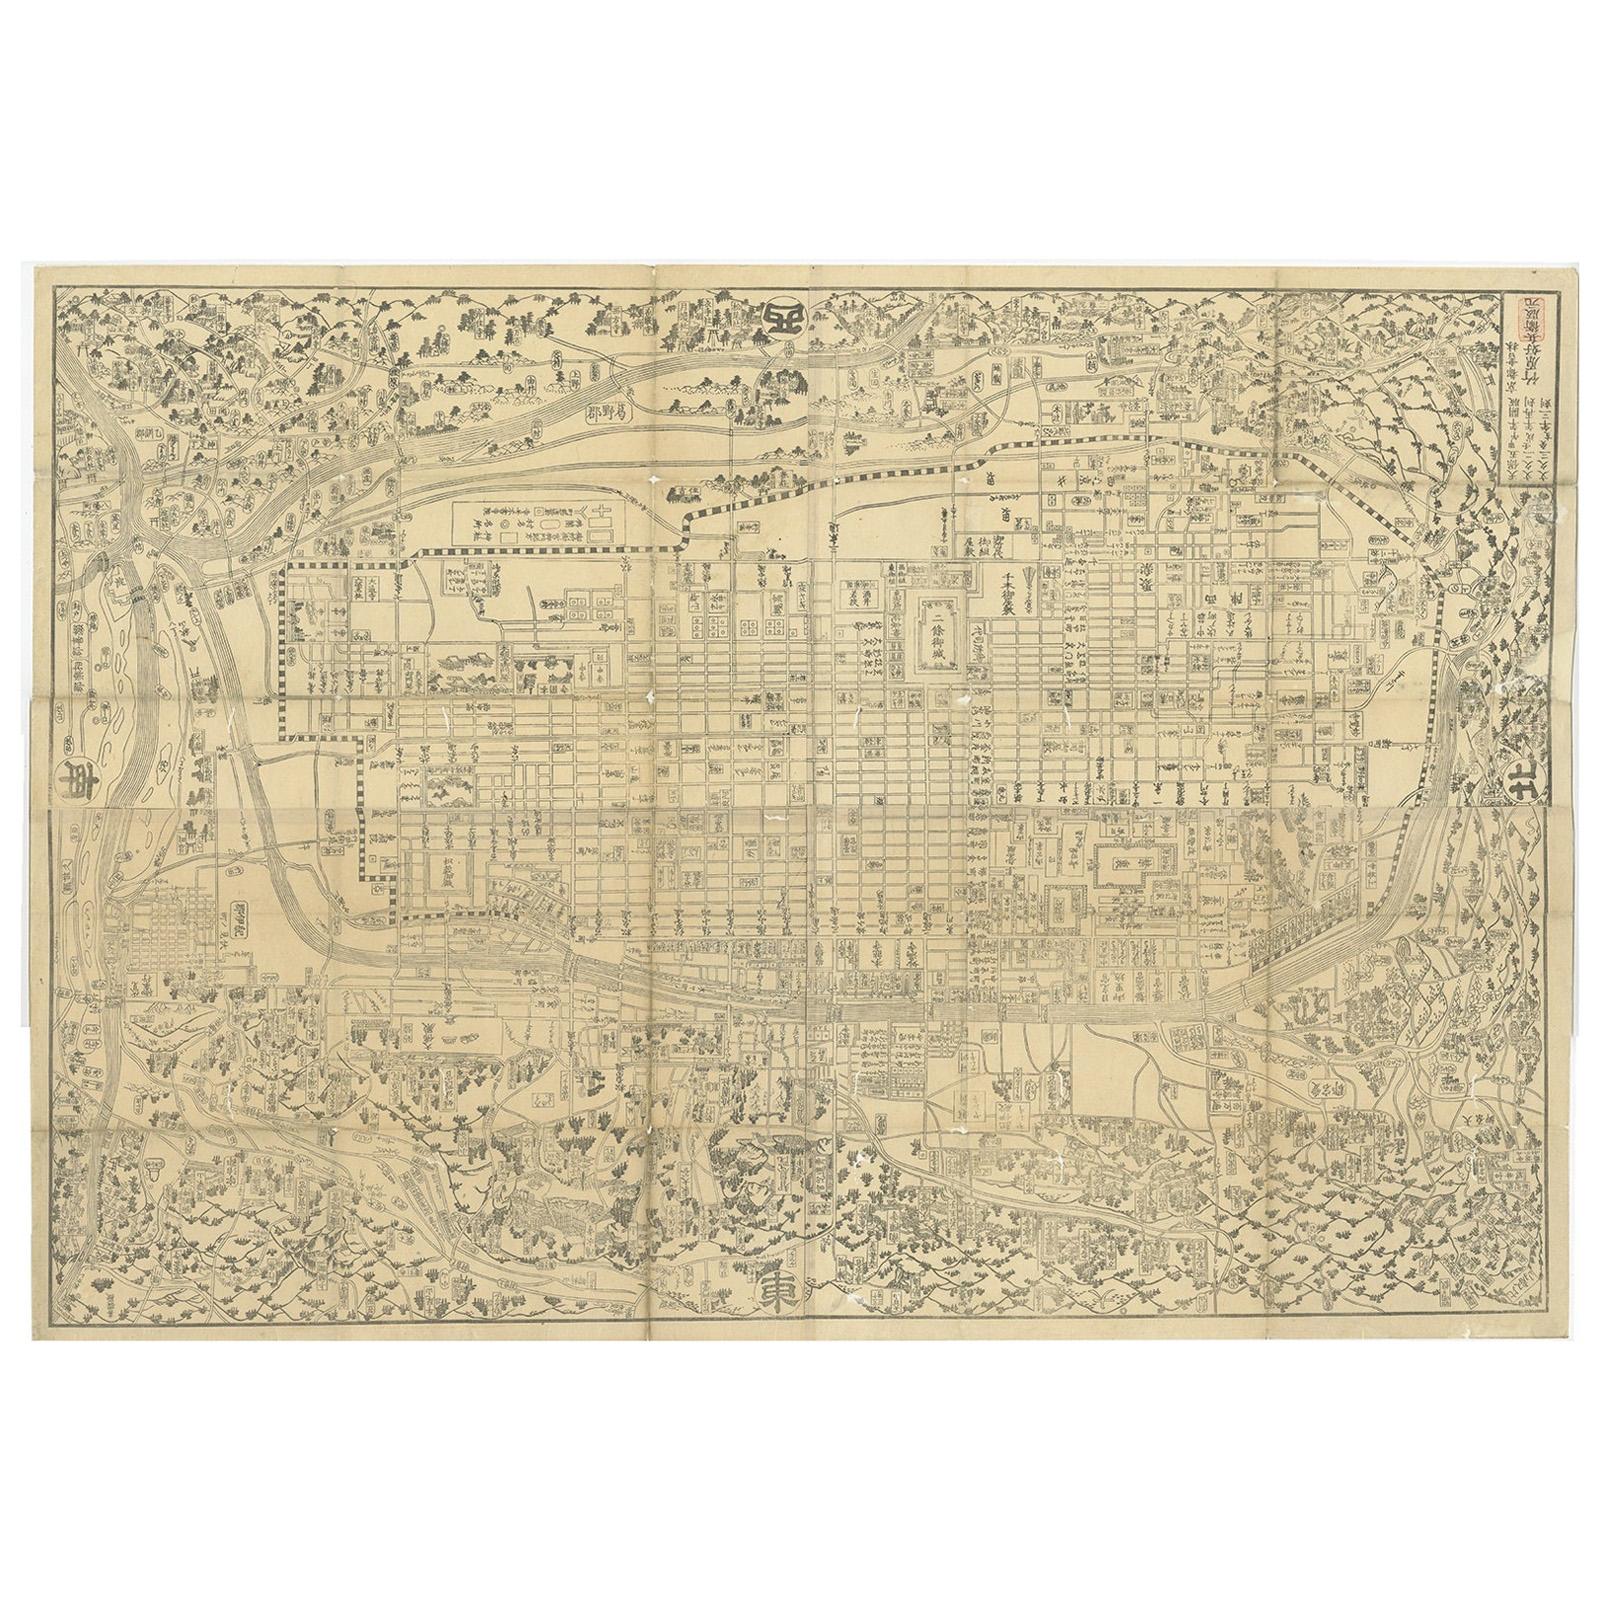 Antique Map of Kyoto 'Japan' Published in 1833